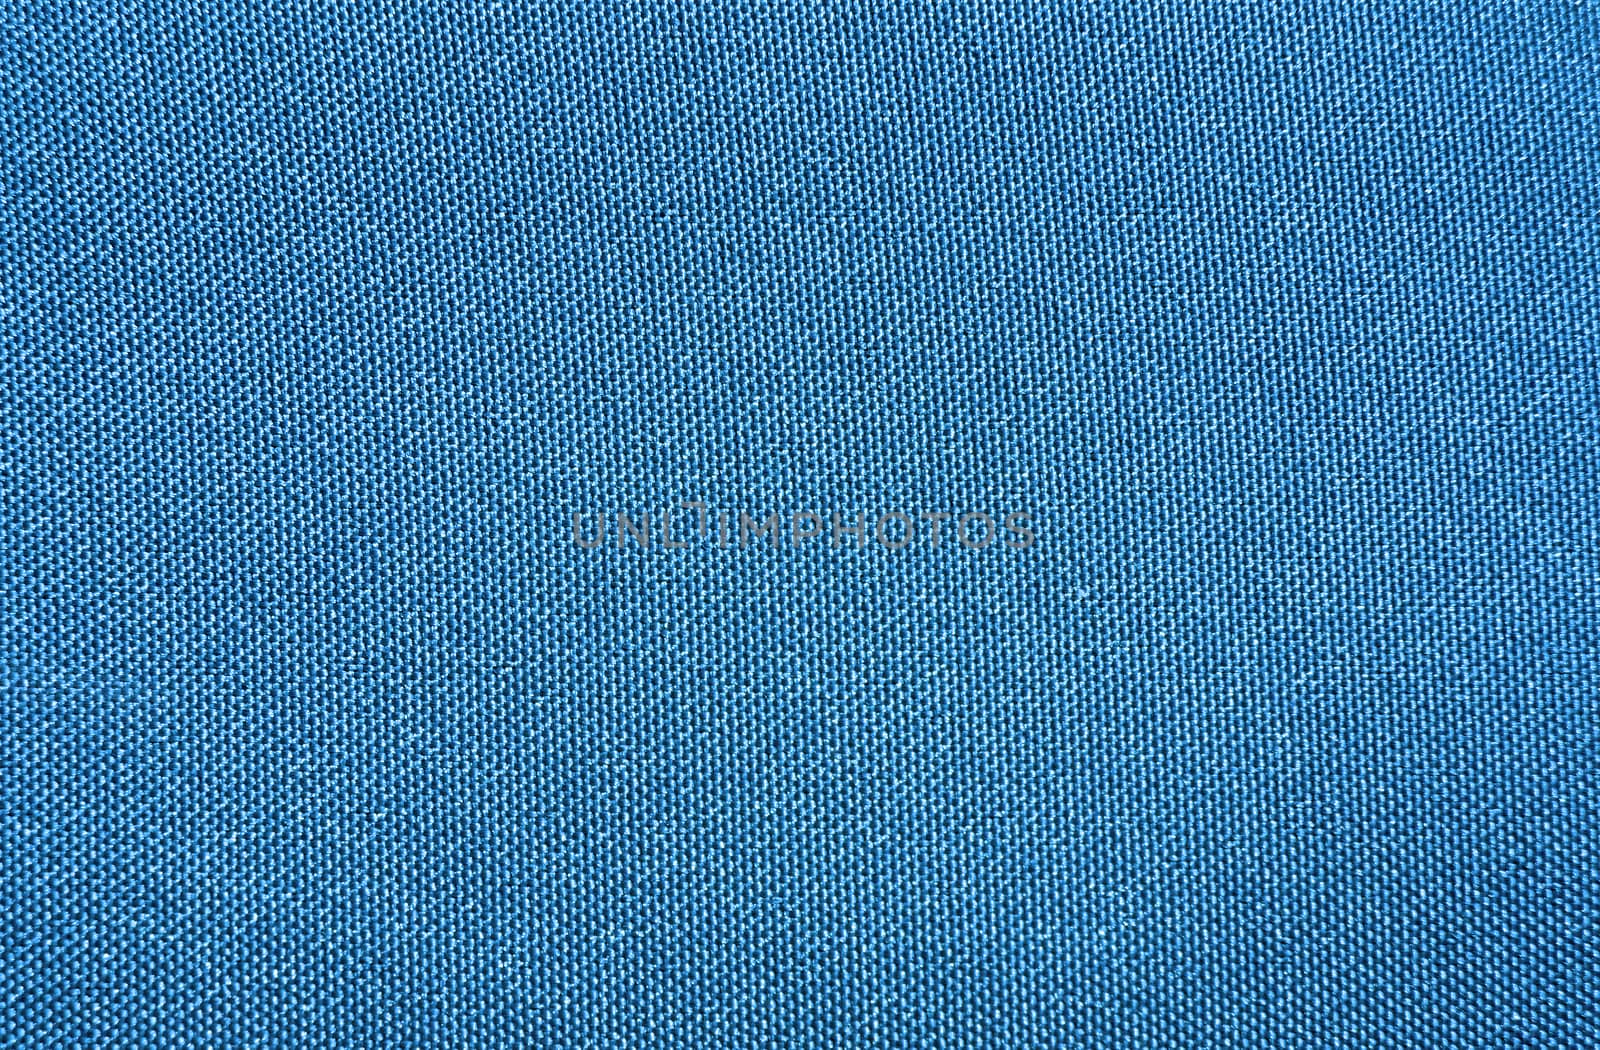 Texture of a blue woven synthetic waterproof fabric by Chiffanna